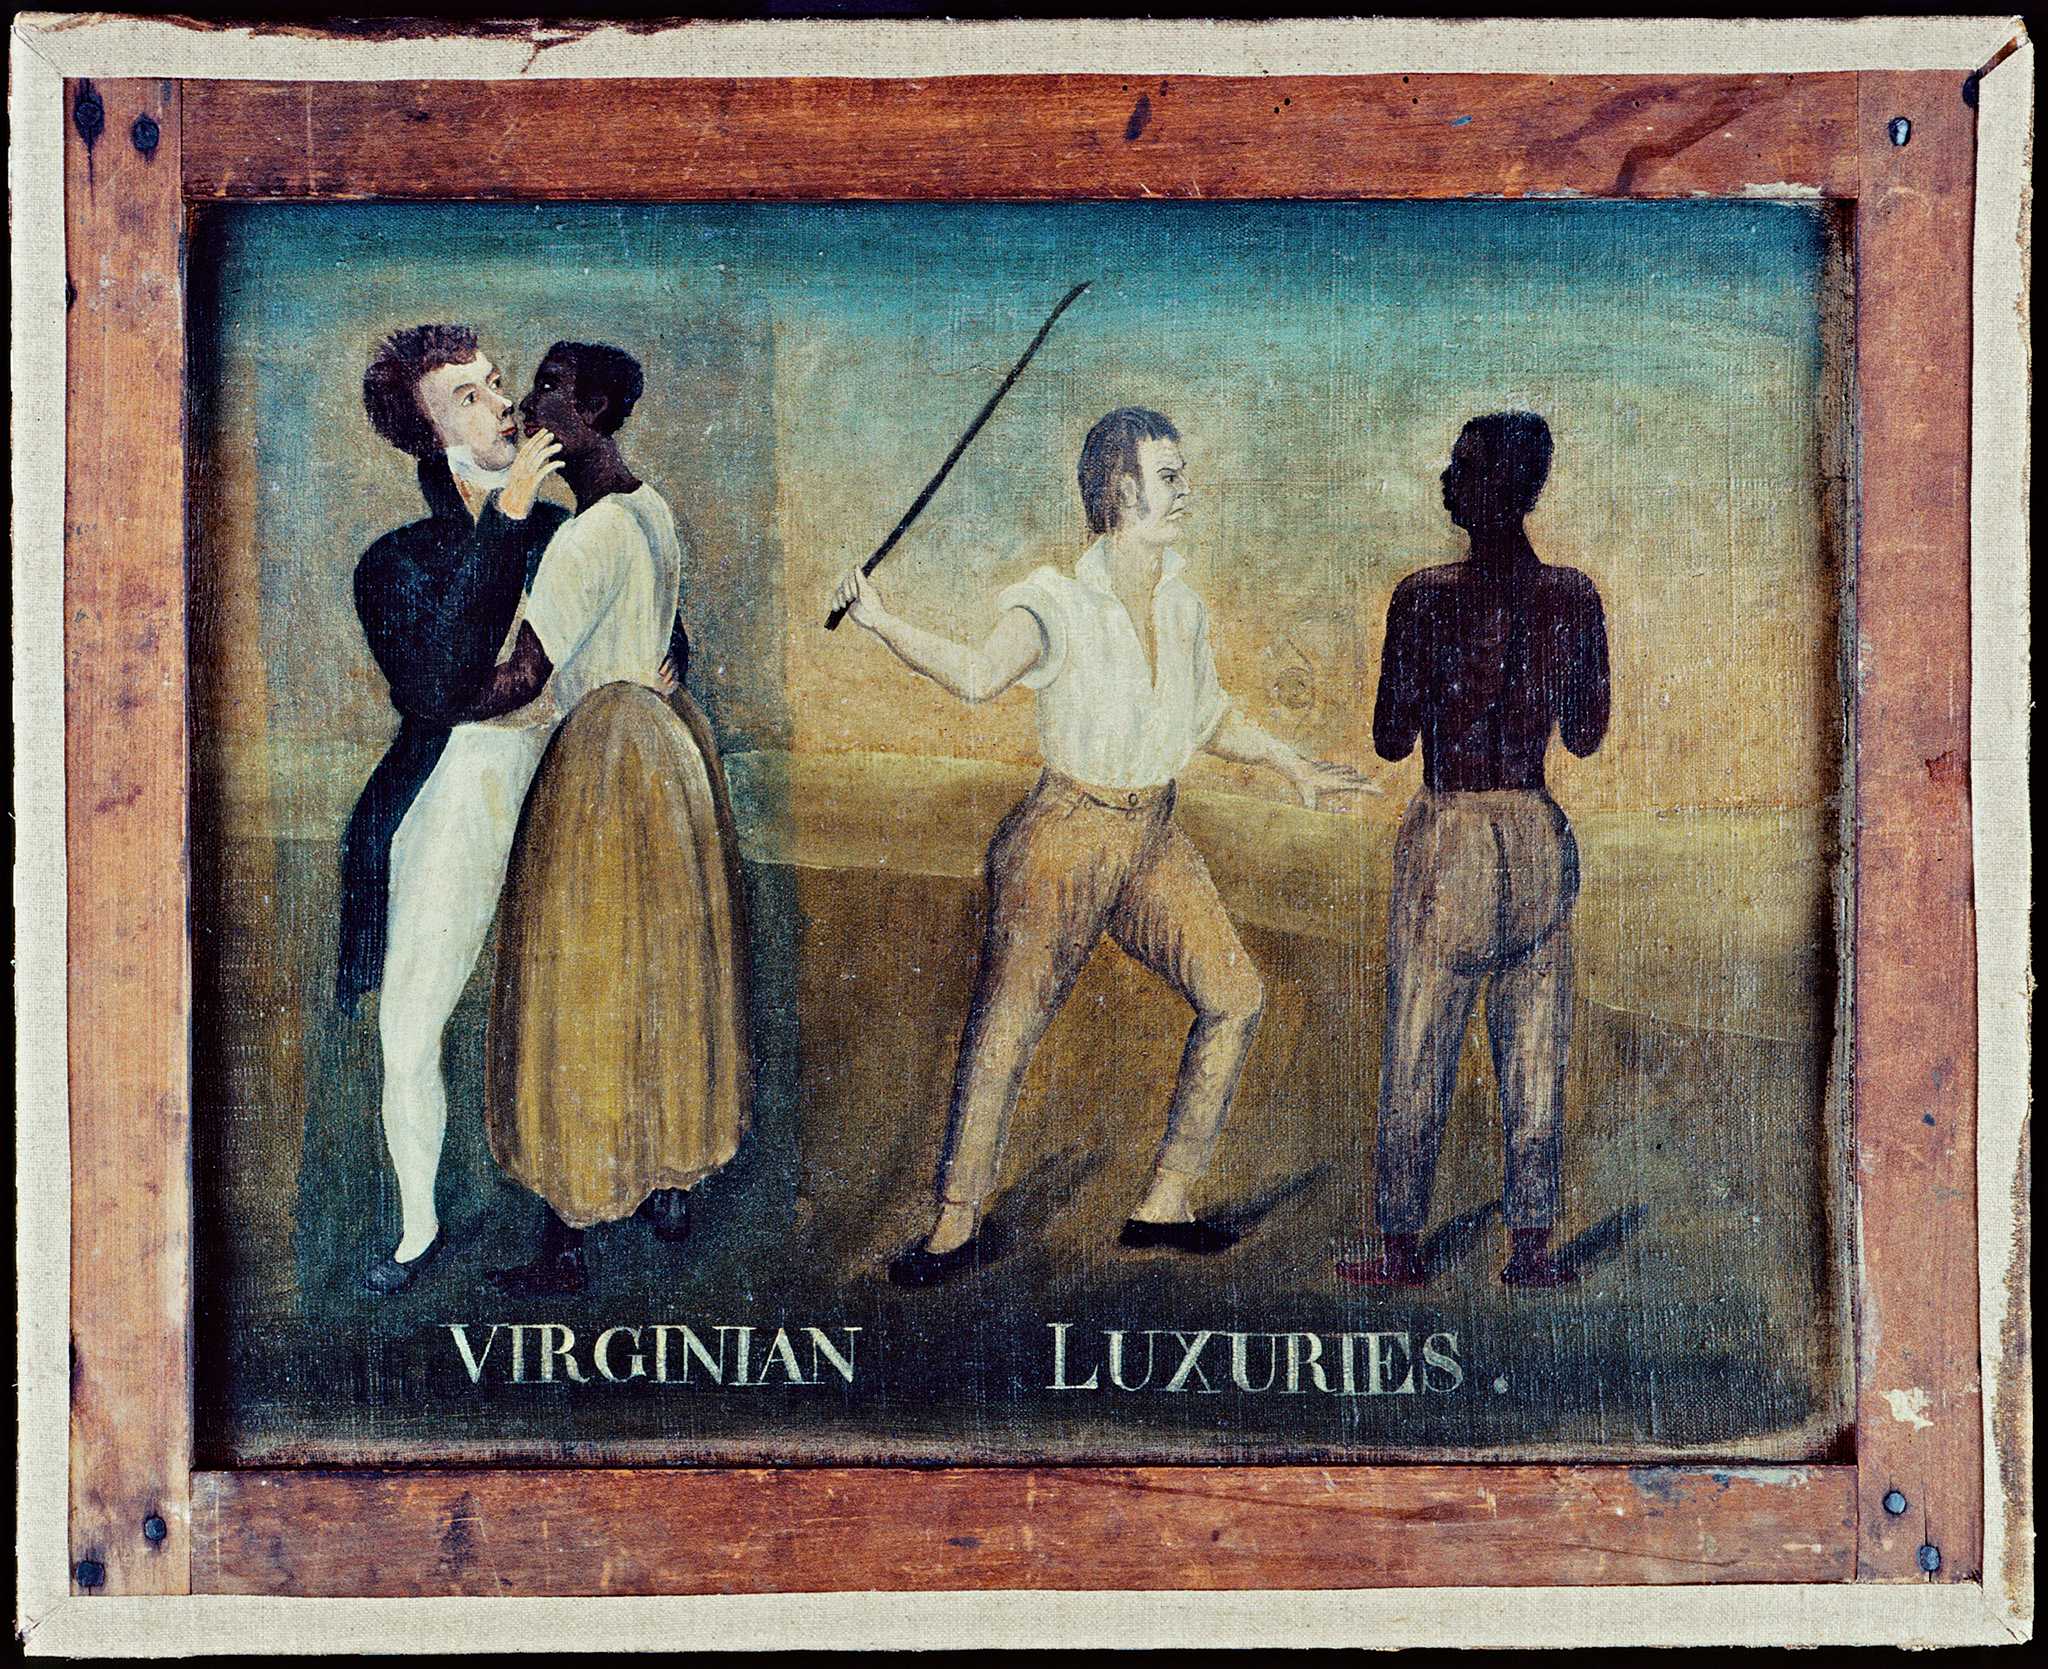 Painting showing enslaver hugging and then beating an enslaved person